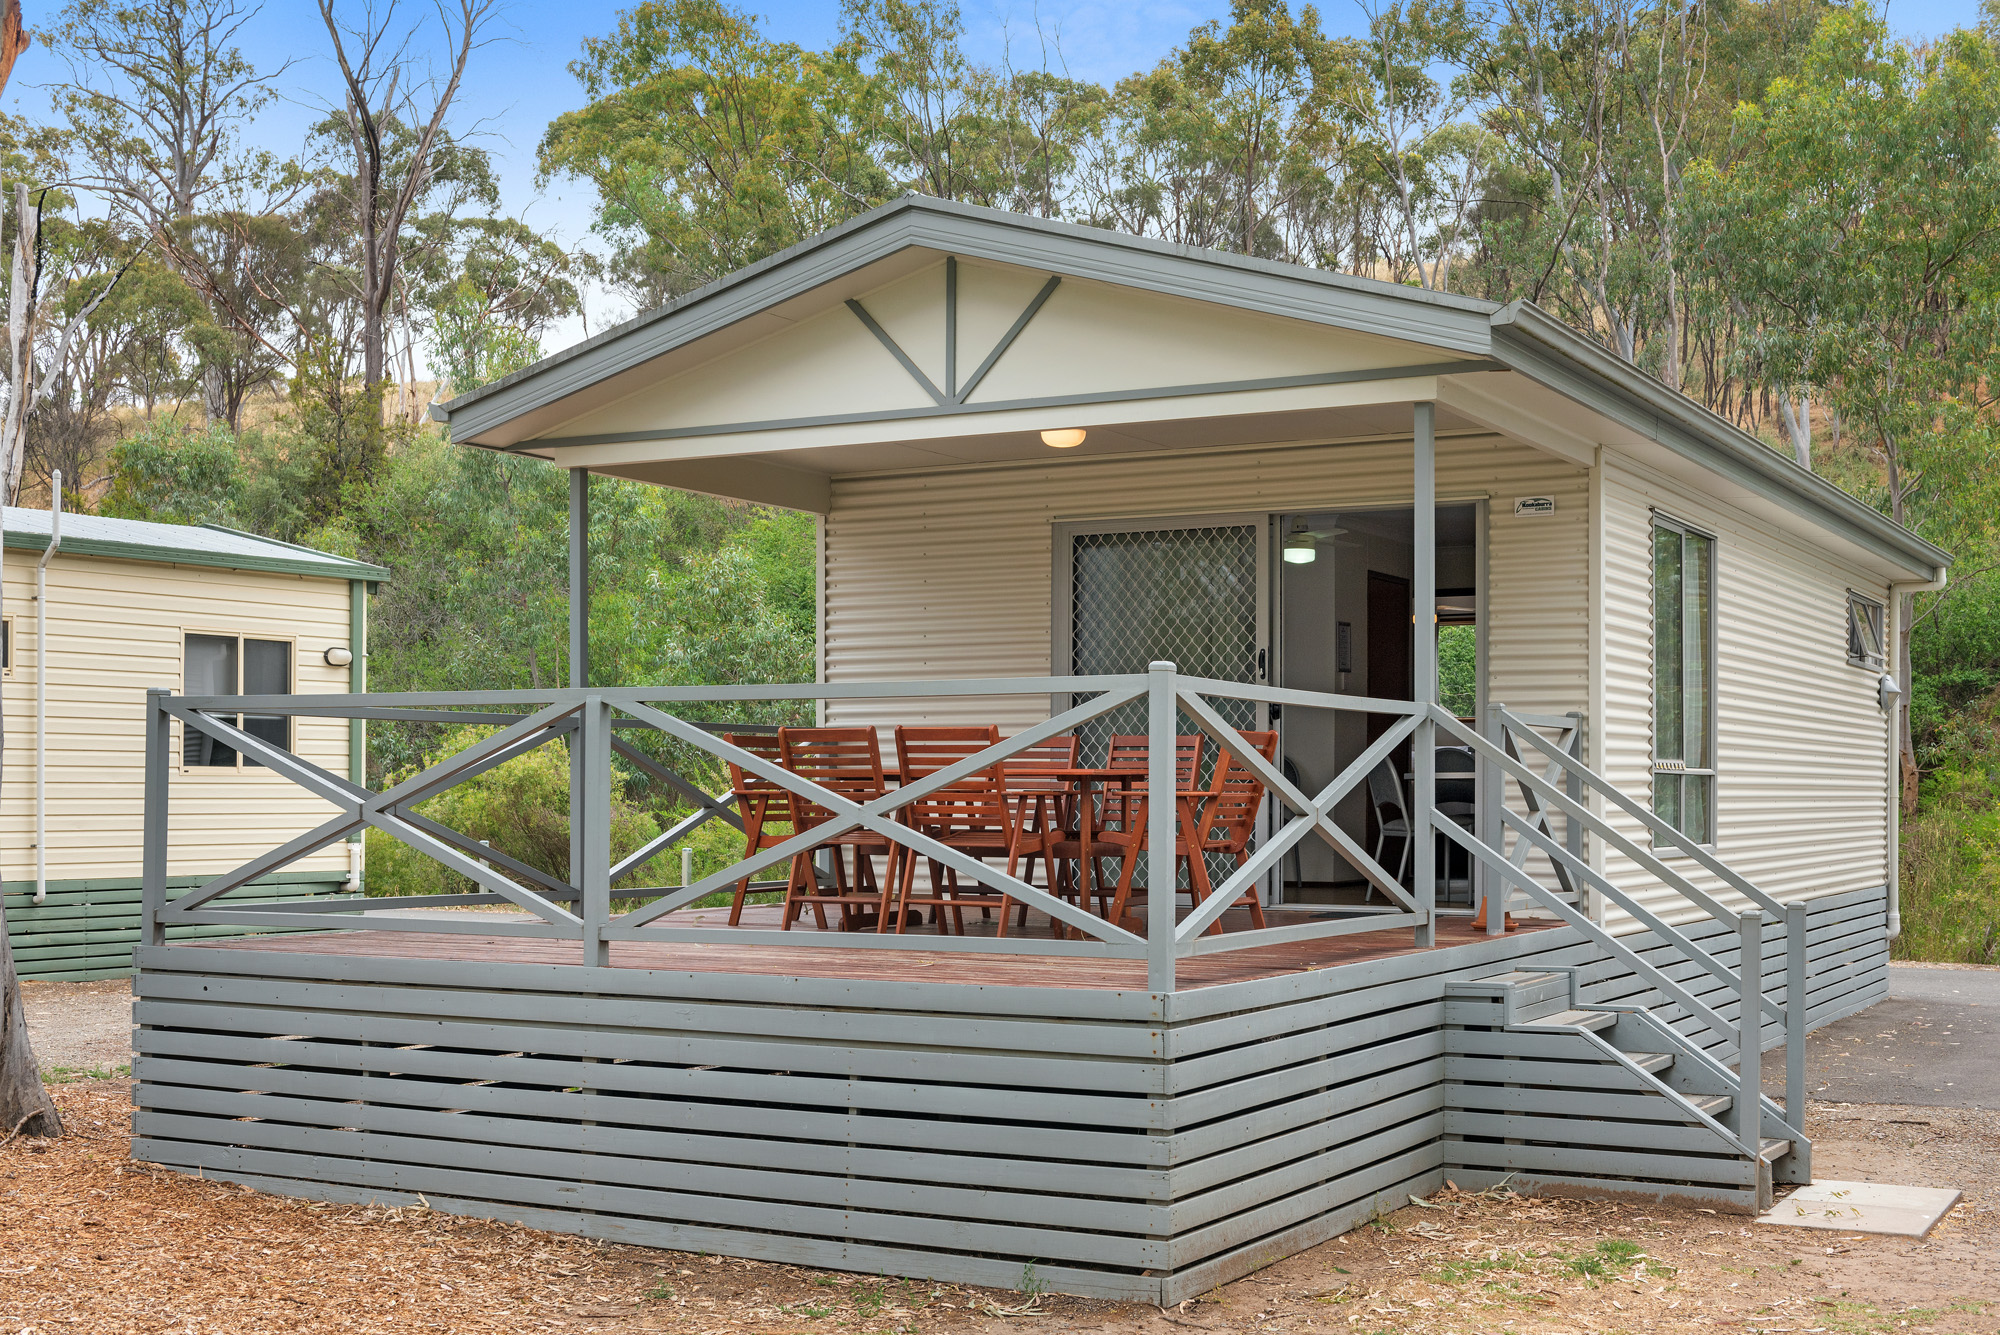 best holiday accommodation in australia clare valley